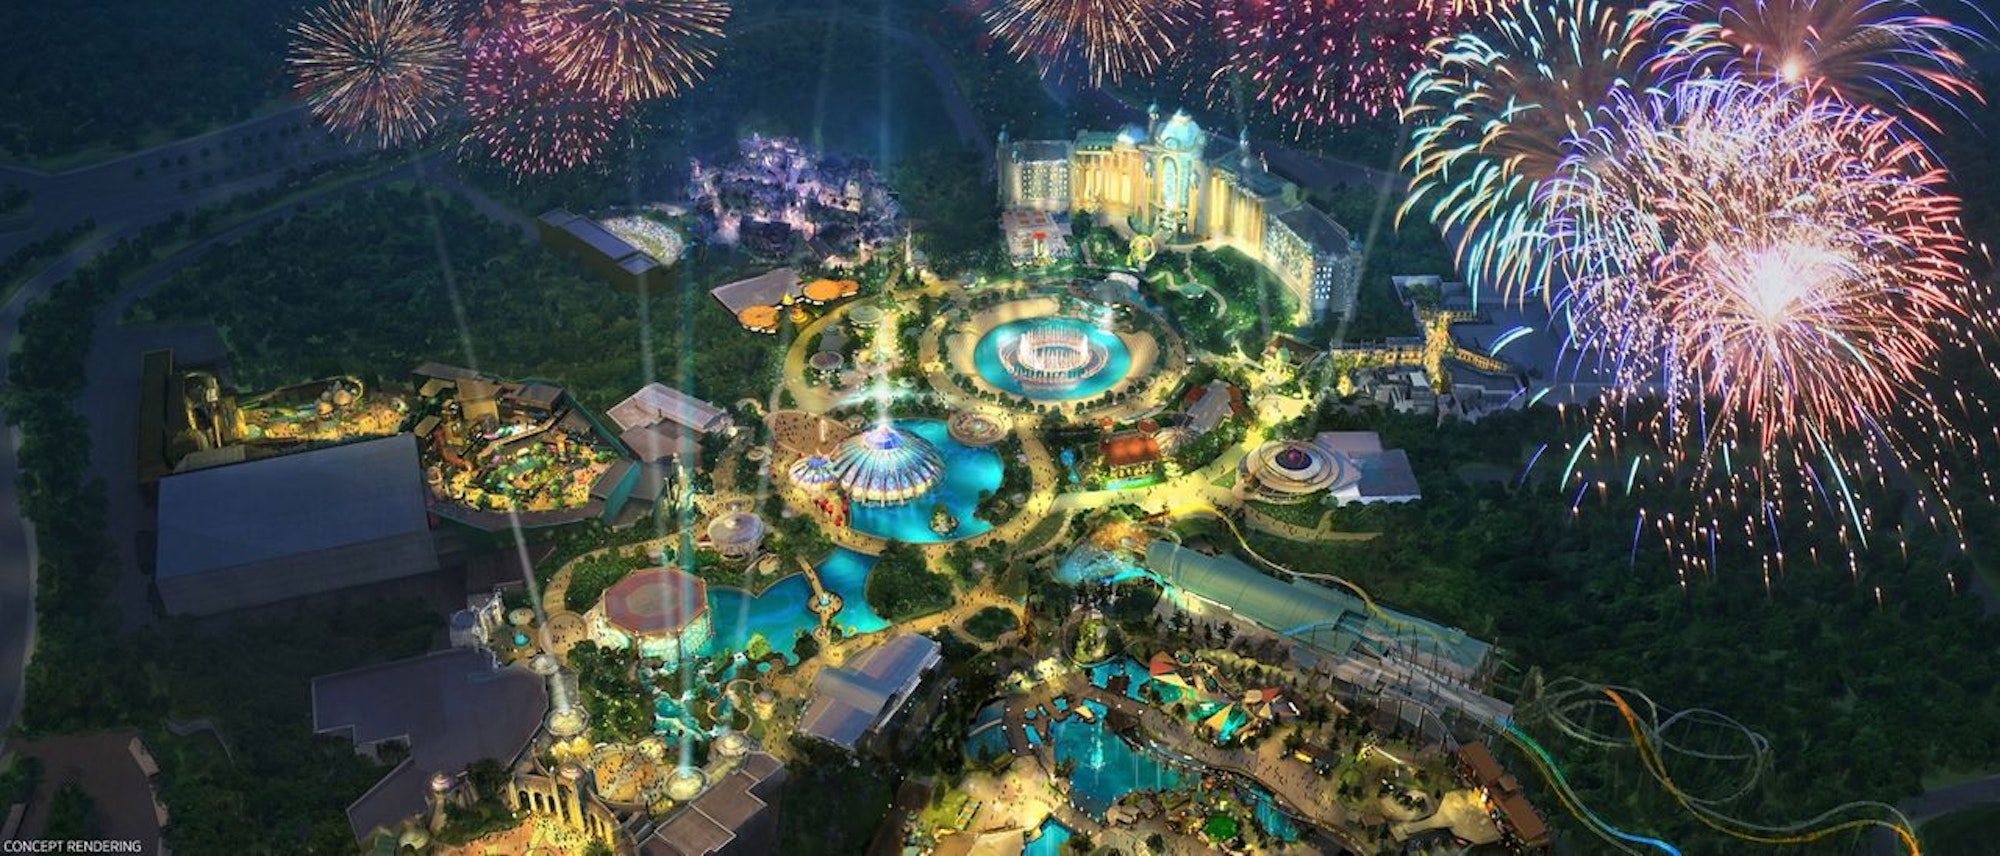 Cover Image for Rumored Fantastic Beasts Themed Land Coming to Universal’s Epic Universe